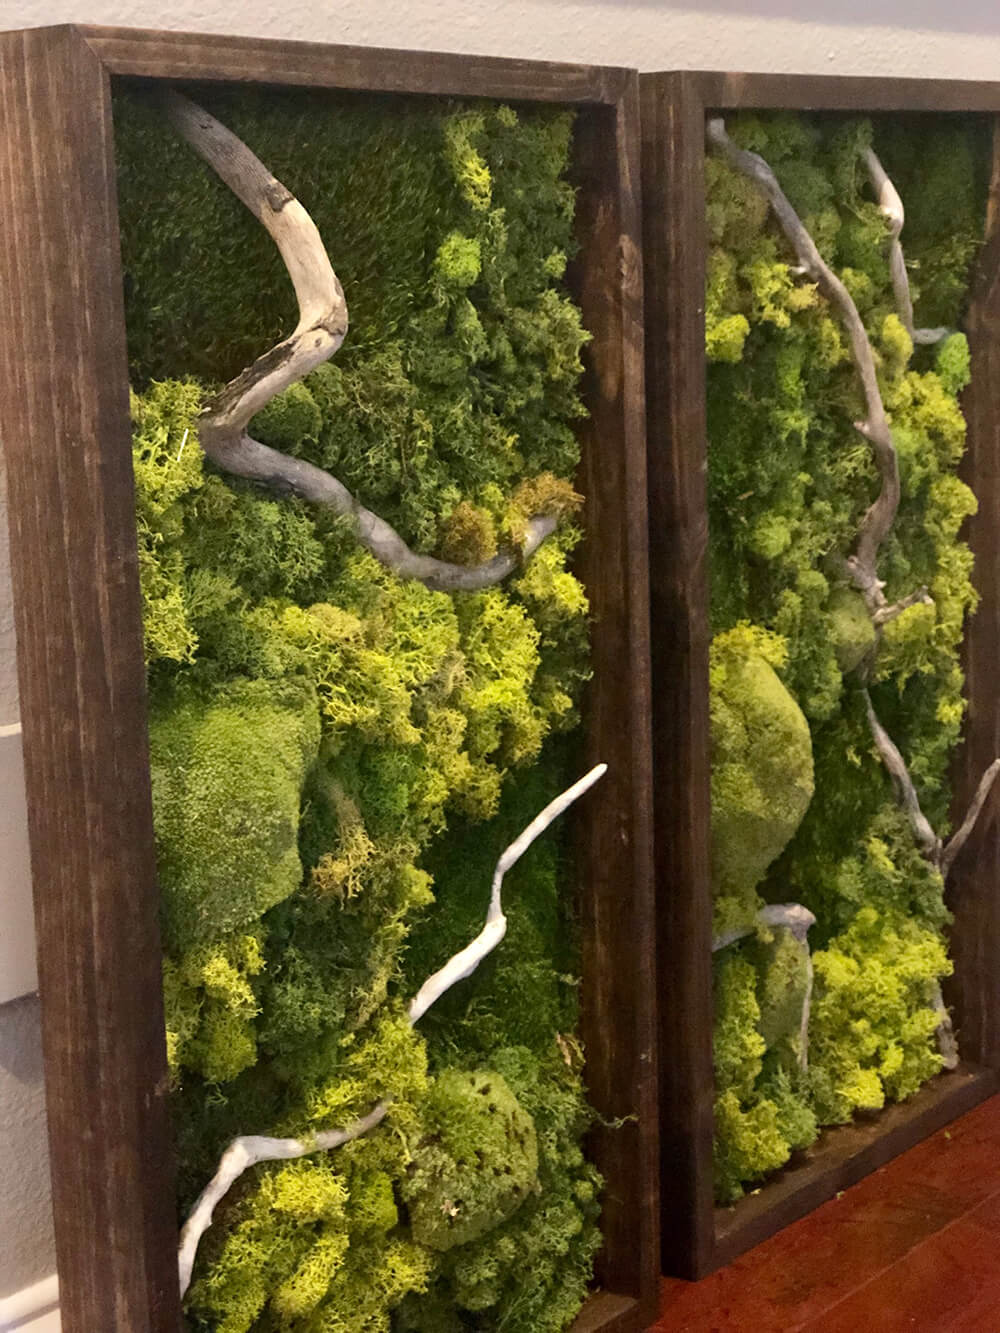 Preserved moss wall art utilizing a variety of preserved moss; cushion moss, mood moss and pool moss. For eco-friendly interiors